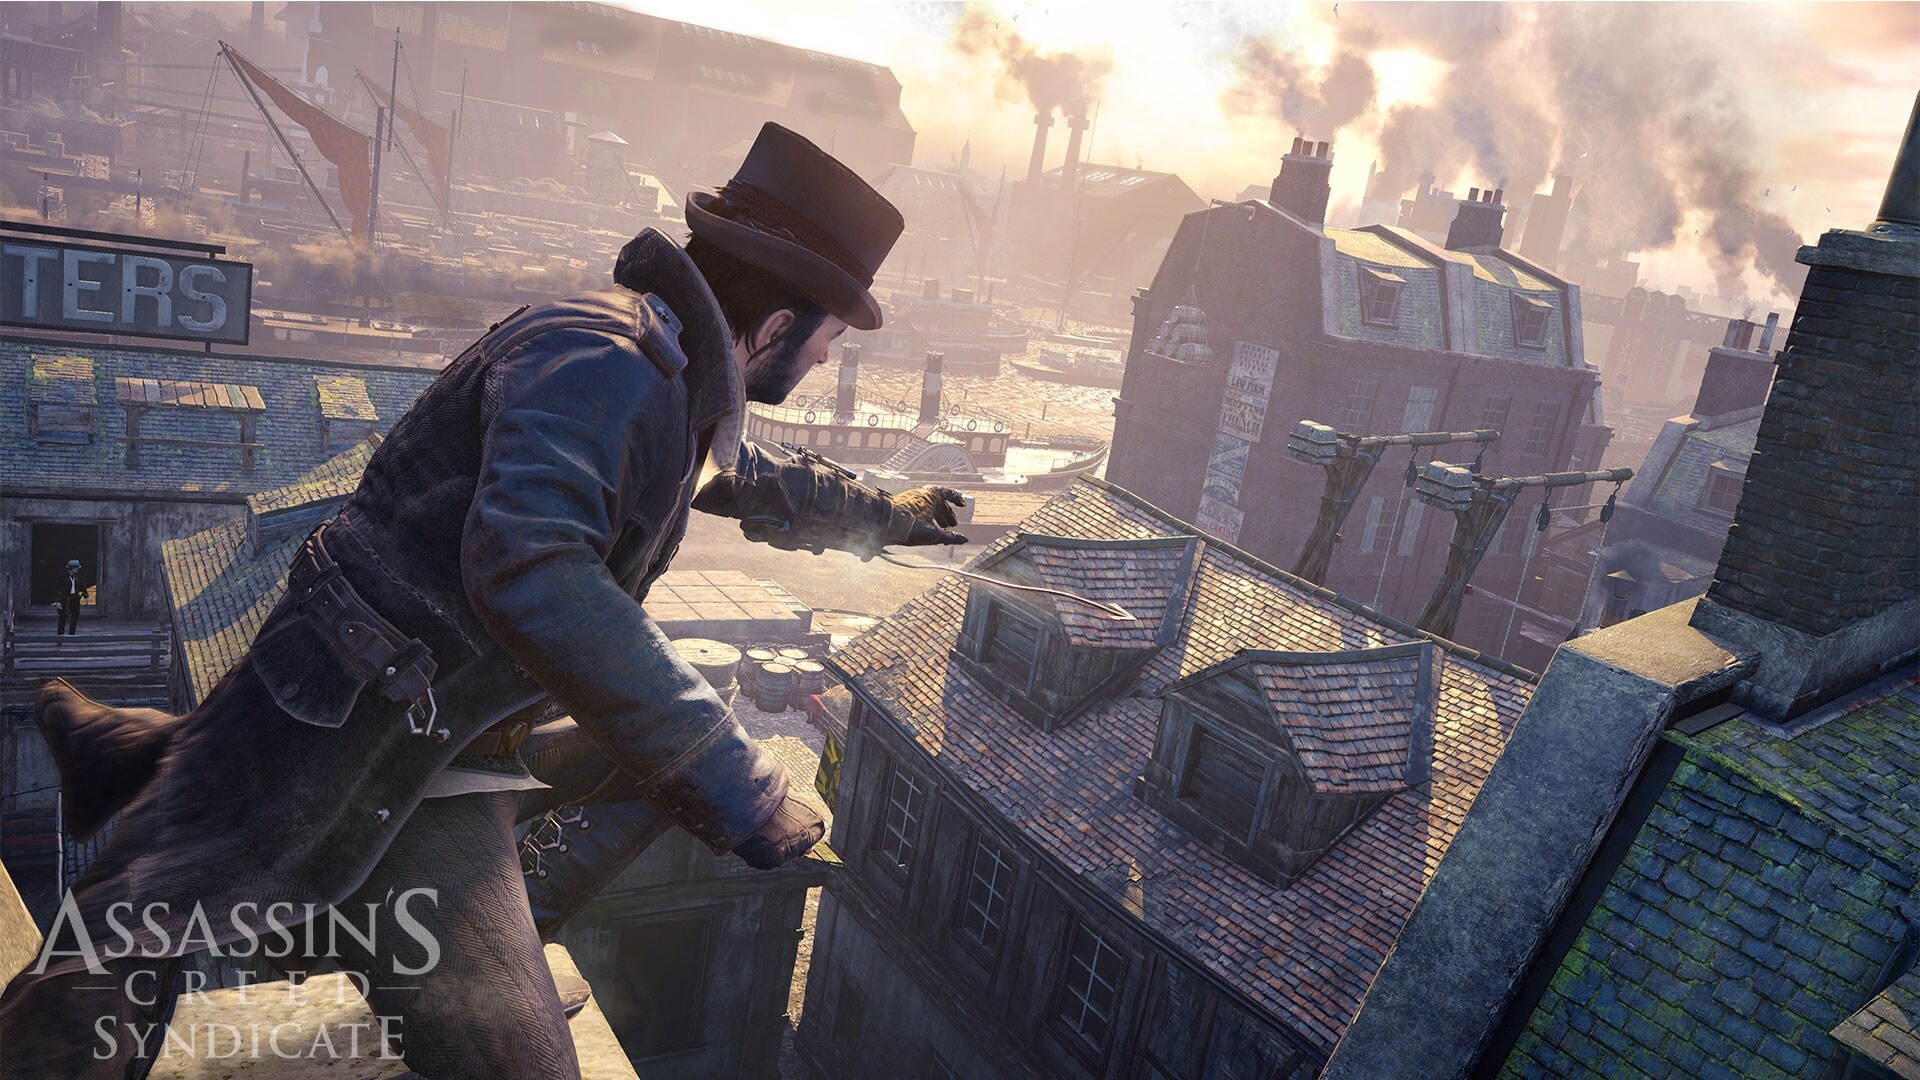 Recap: Assassin’s Creed Syndicate, Samsung Galaxy A05, and Varjo XR-4